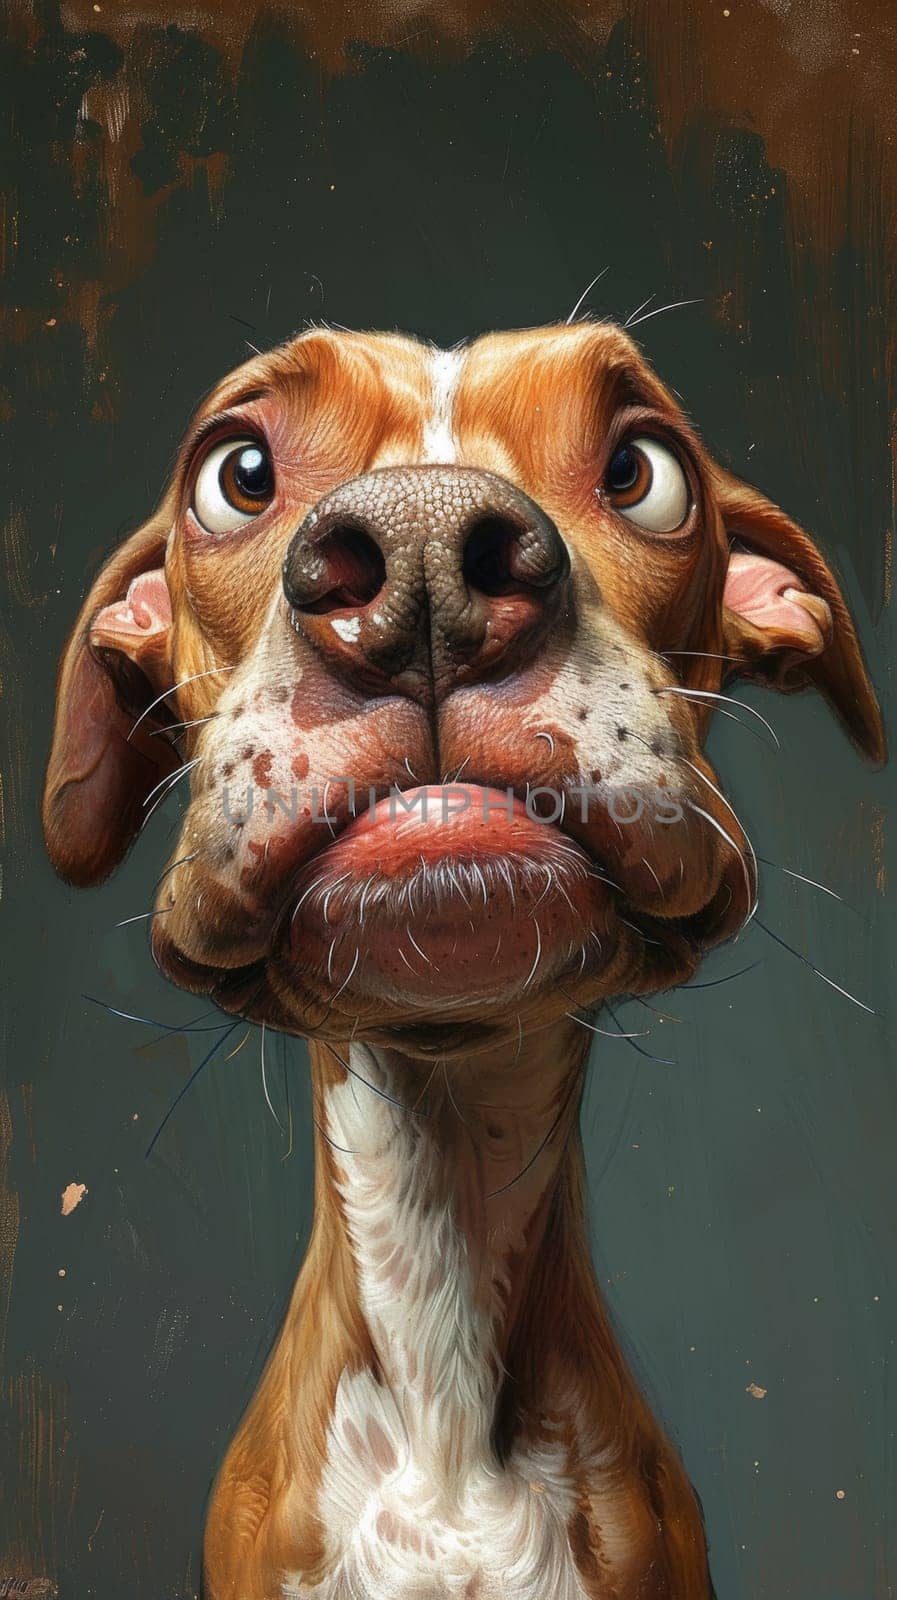 A close up of a dog looking at the camera with his mouth open, AI by starush